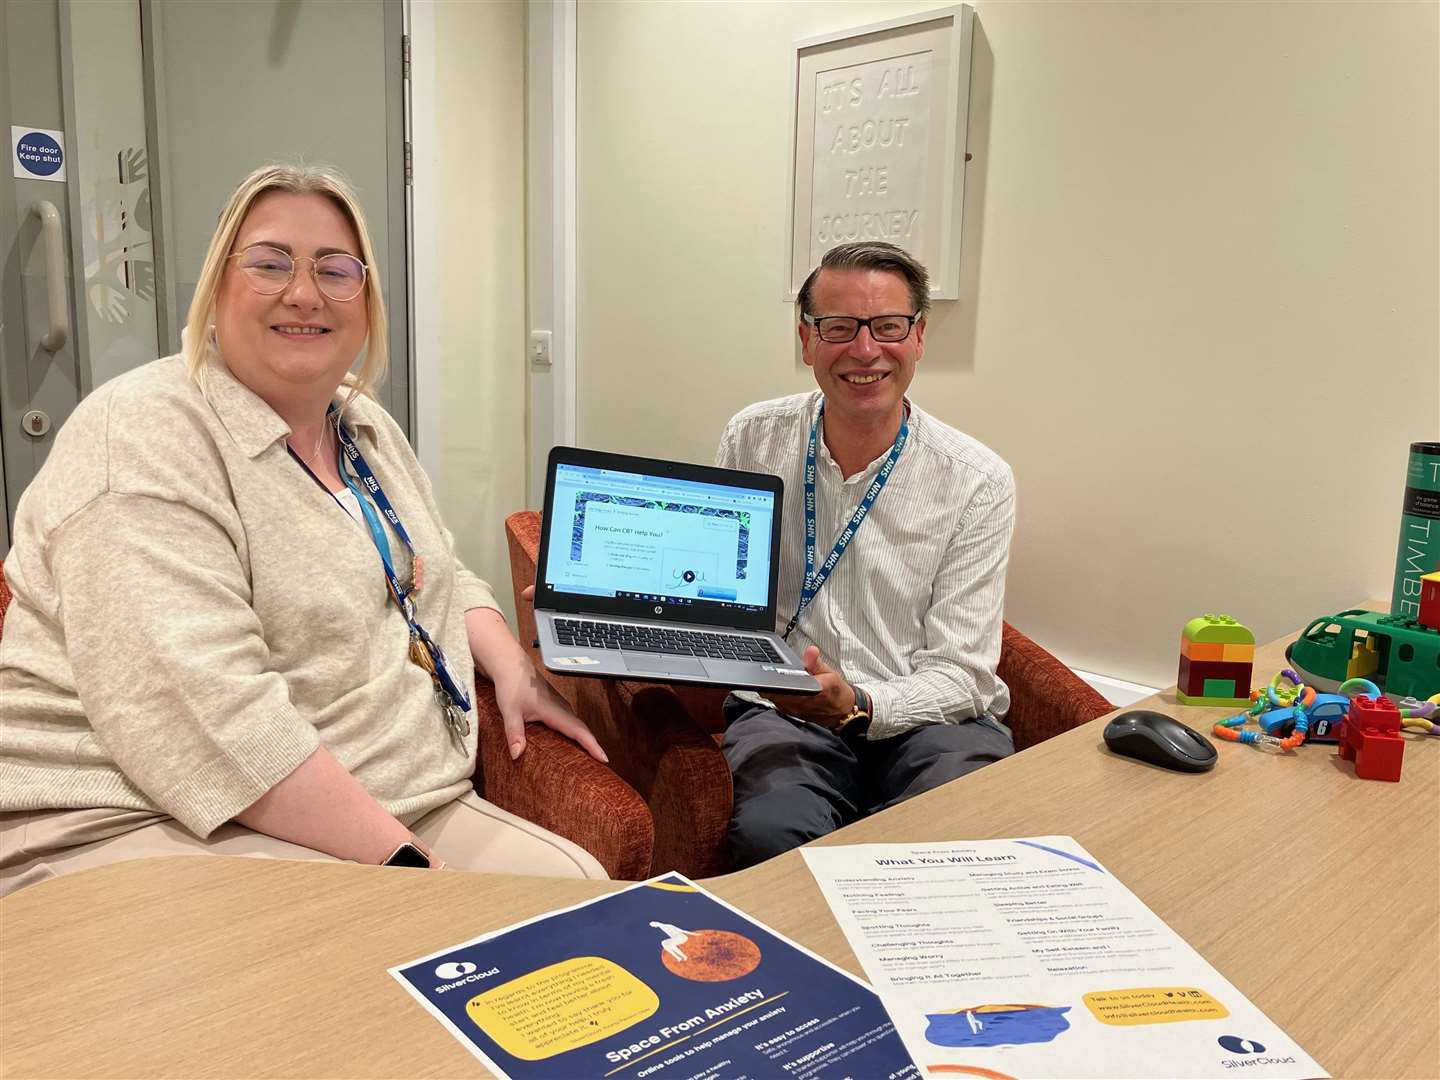 CAMHS service manager in Grampian Amanda Farquharson and Paul Toseland, cCBT Lead for NHS Grampian.